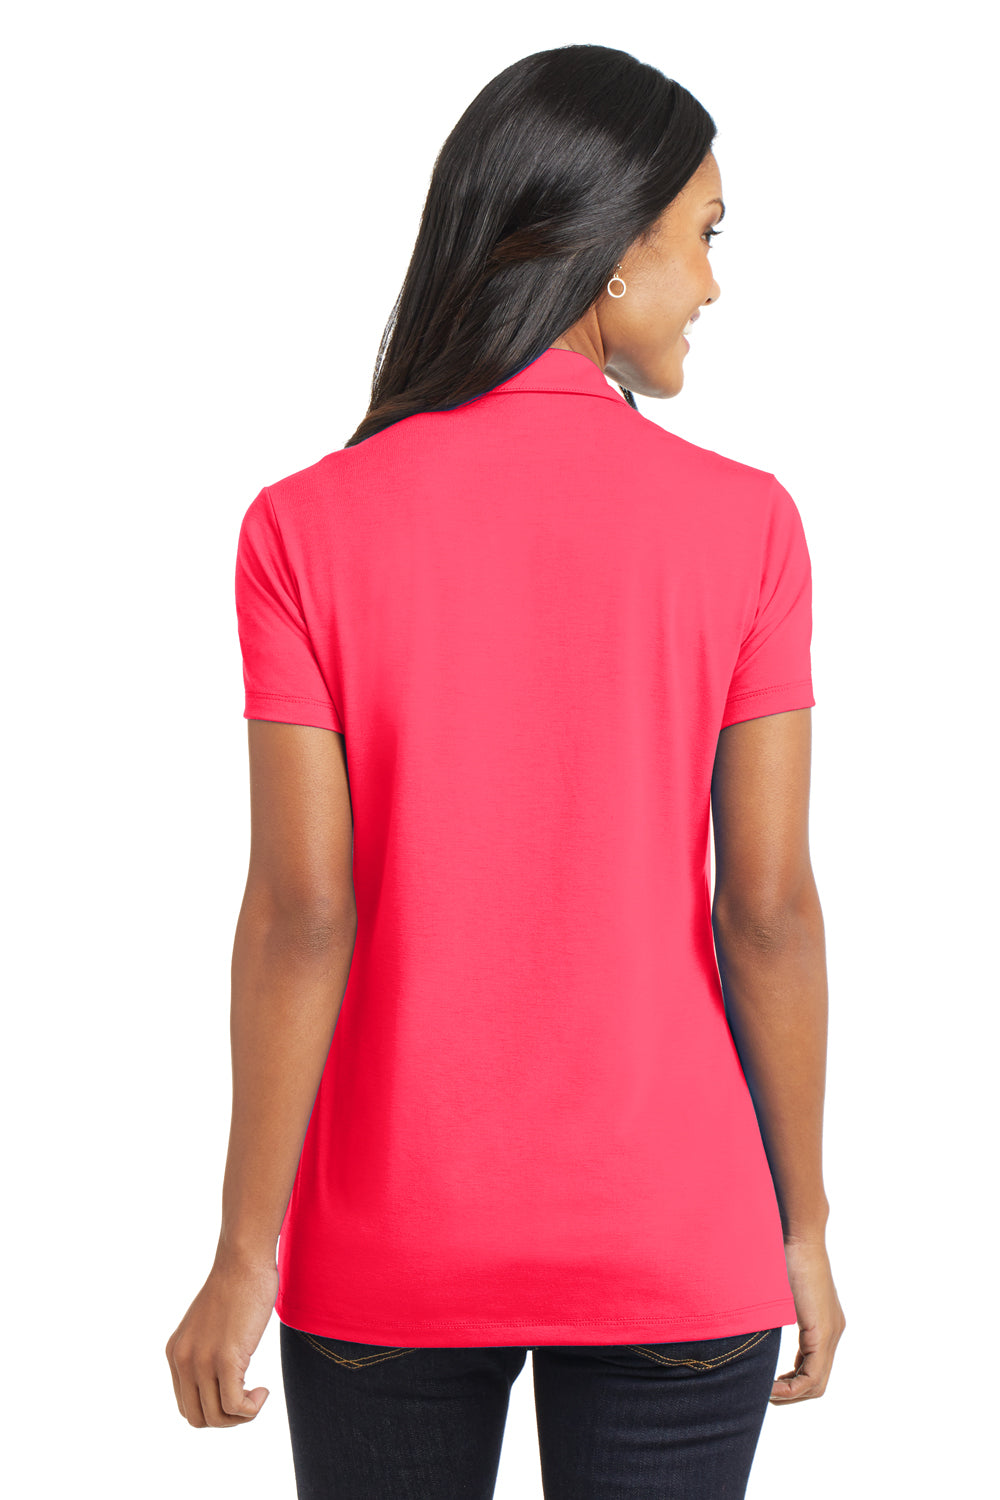 Port Authority L568 Womens Cotton Touch Performance Moisture Wicking Short Sleeve Polo Shirt Hot Coral Pink Back